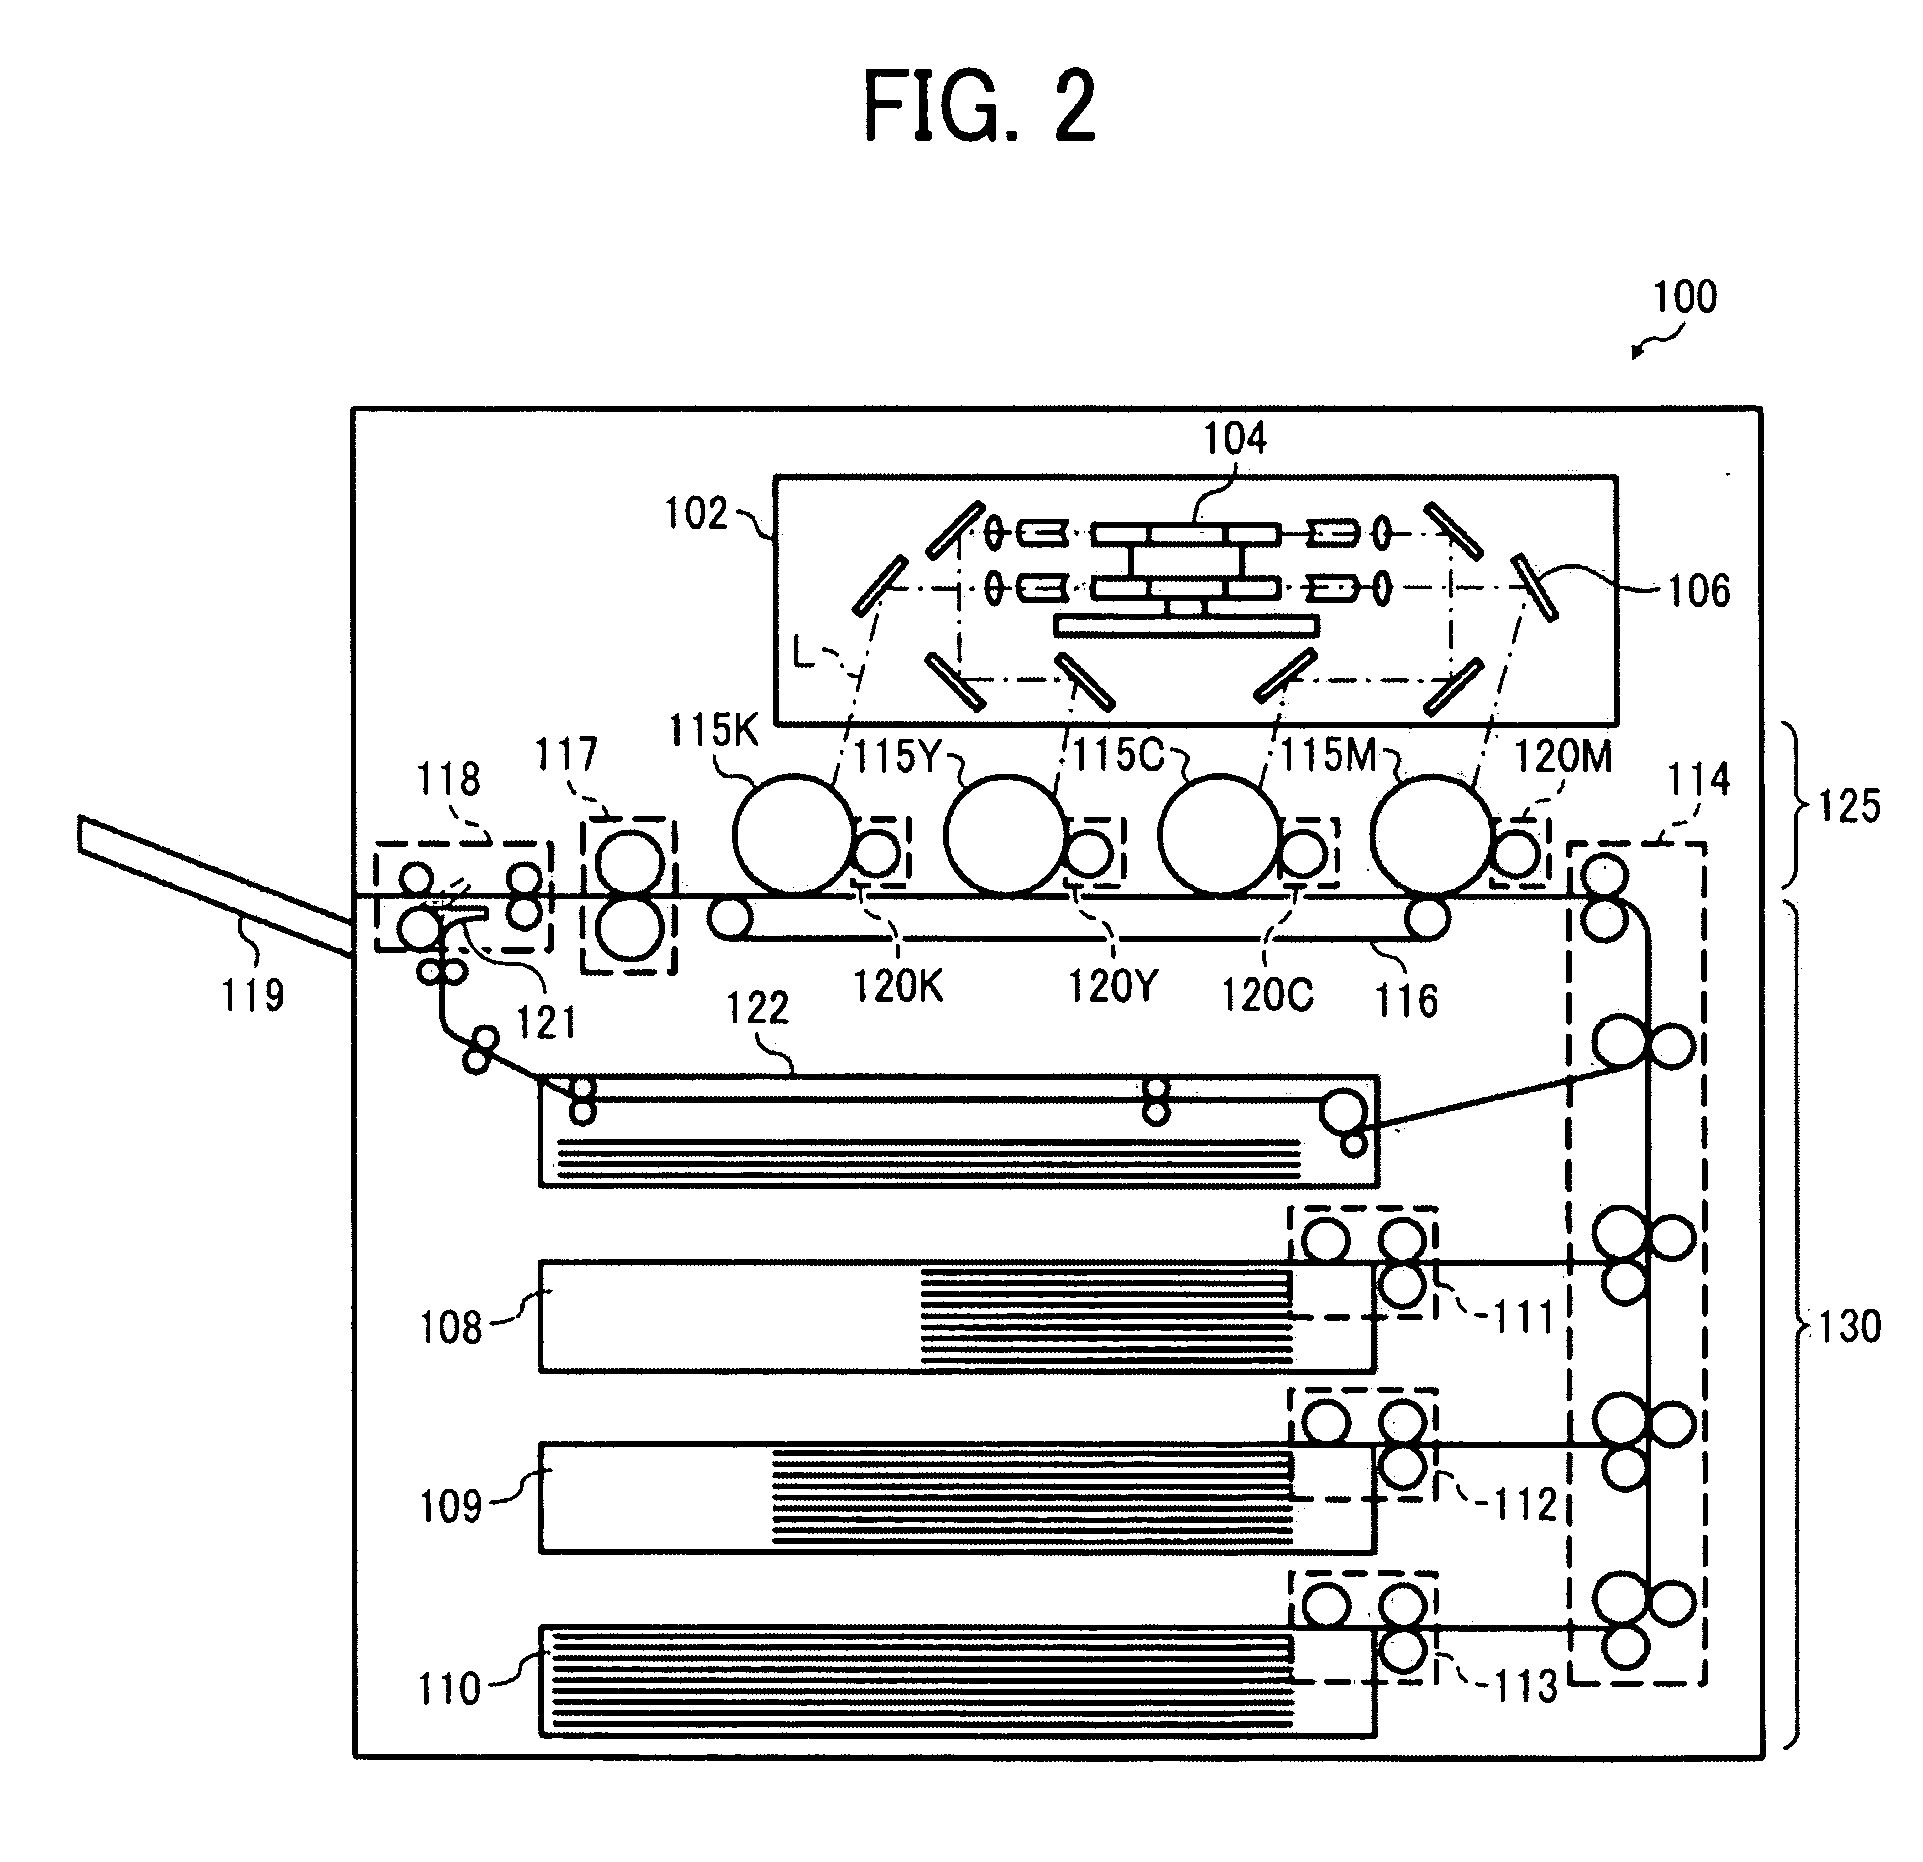 Image processing system and image forming apparatus incorporating same